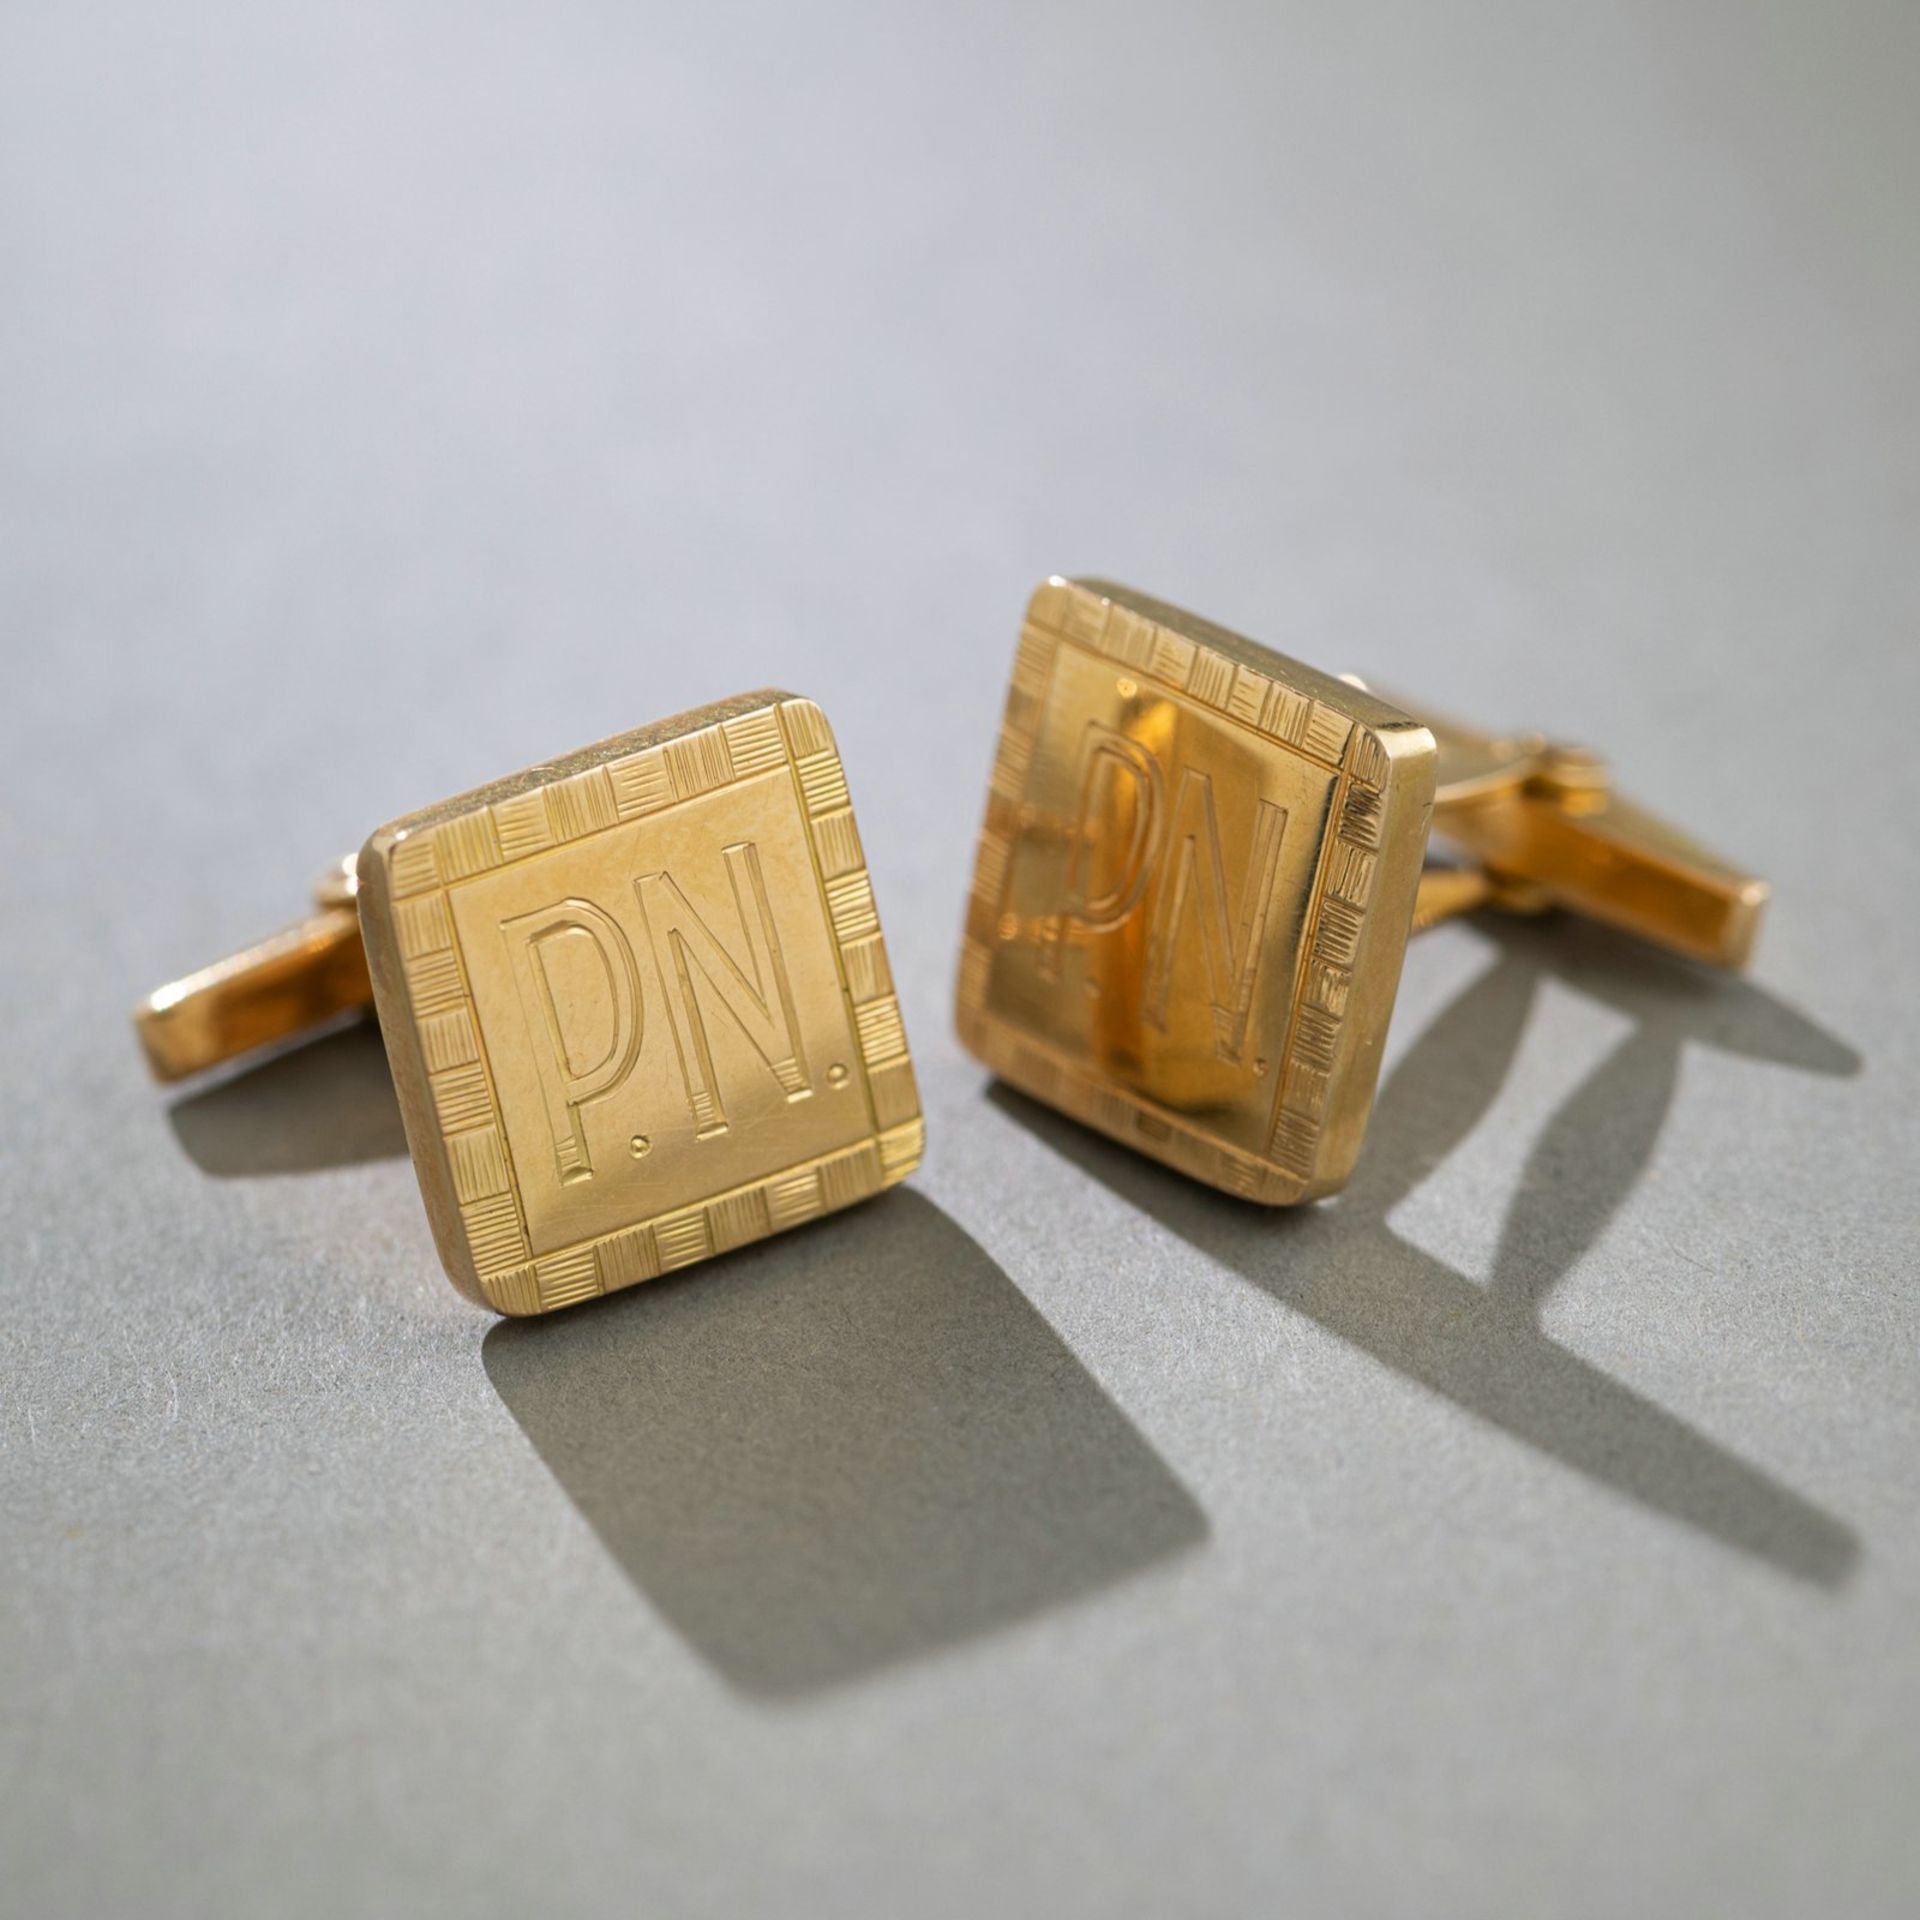 A PAIR OF GOLD CUFF LINKS WITH MONOGRAM